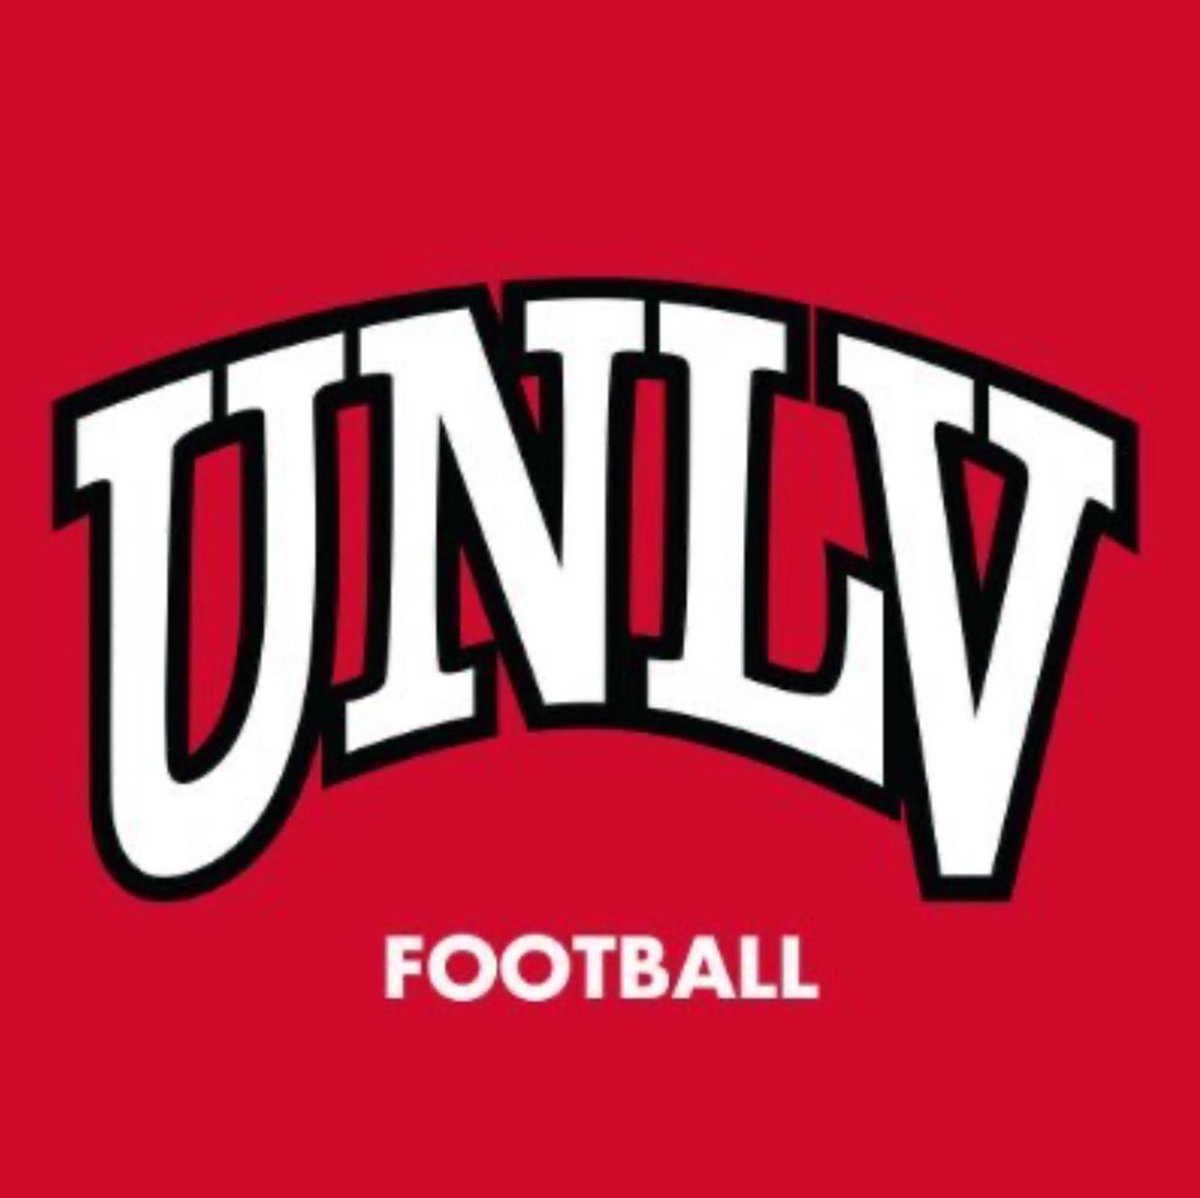 I am blessed to have received my 20th Division 1 offer from the University of Nevada, Las Vegas! @CoachLogo @unlvfootball #UNLVFB